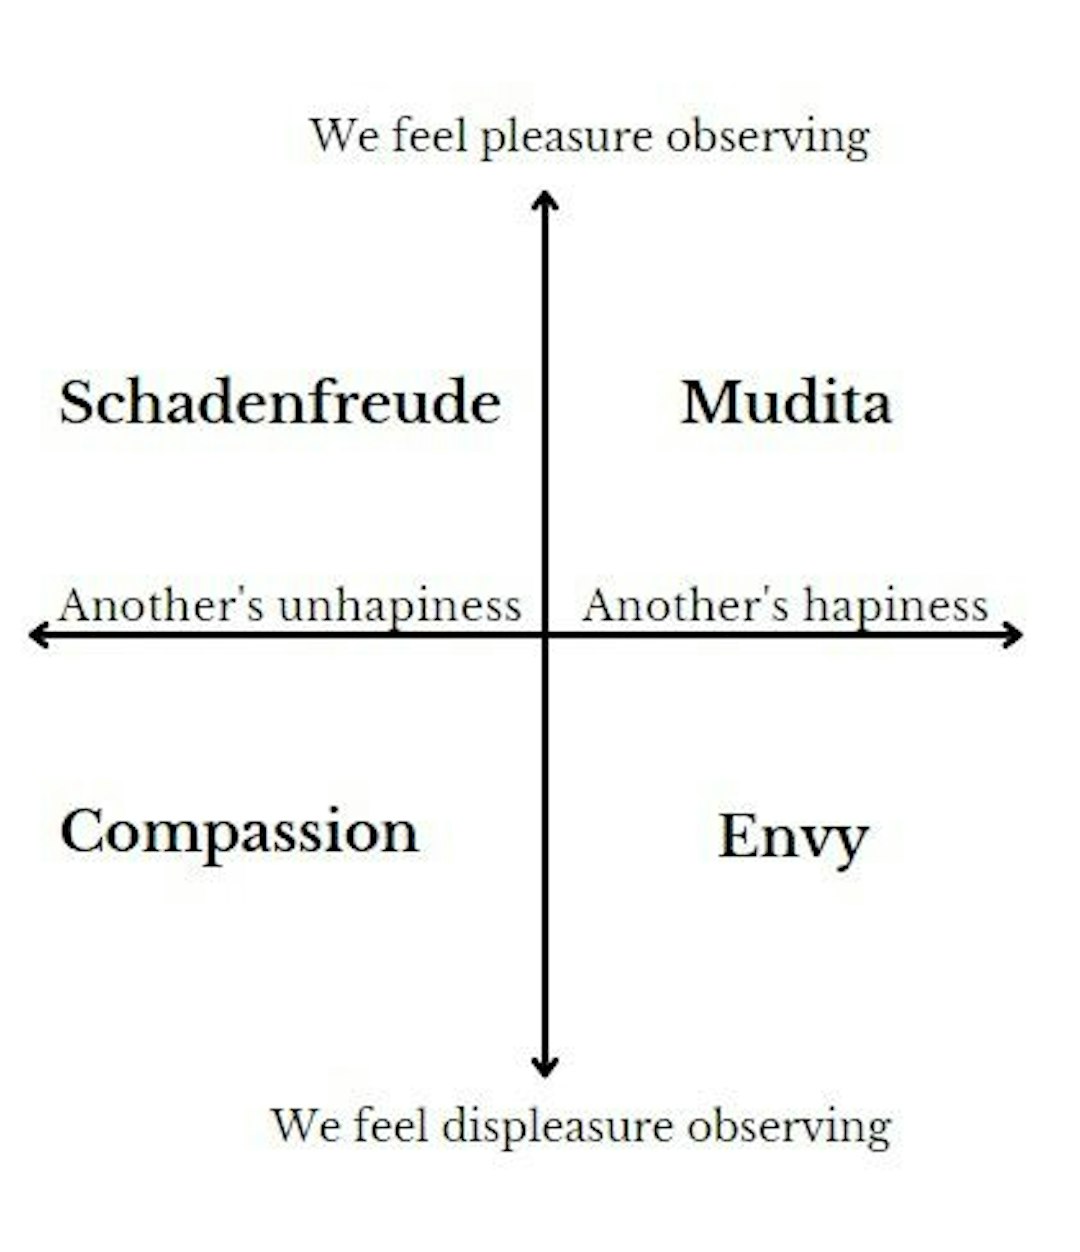 featured image - Four Possible Ways to React to Other People's Happiness or Misery